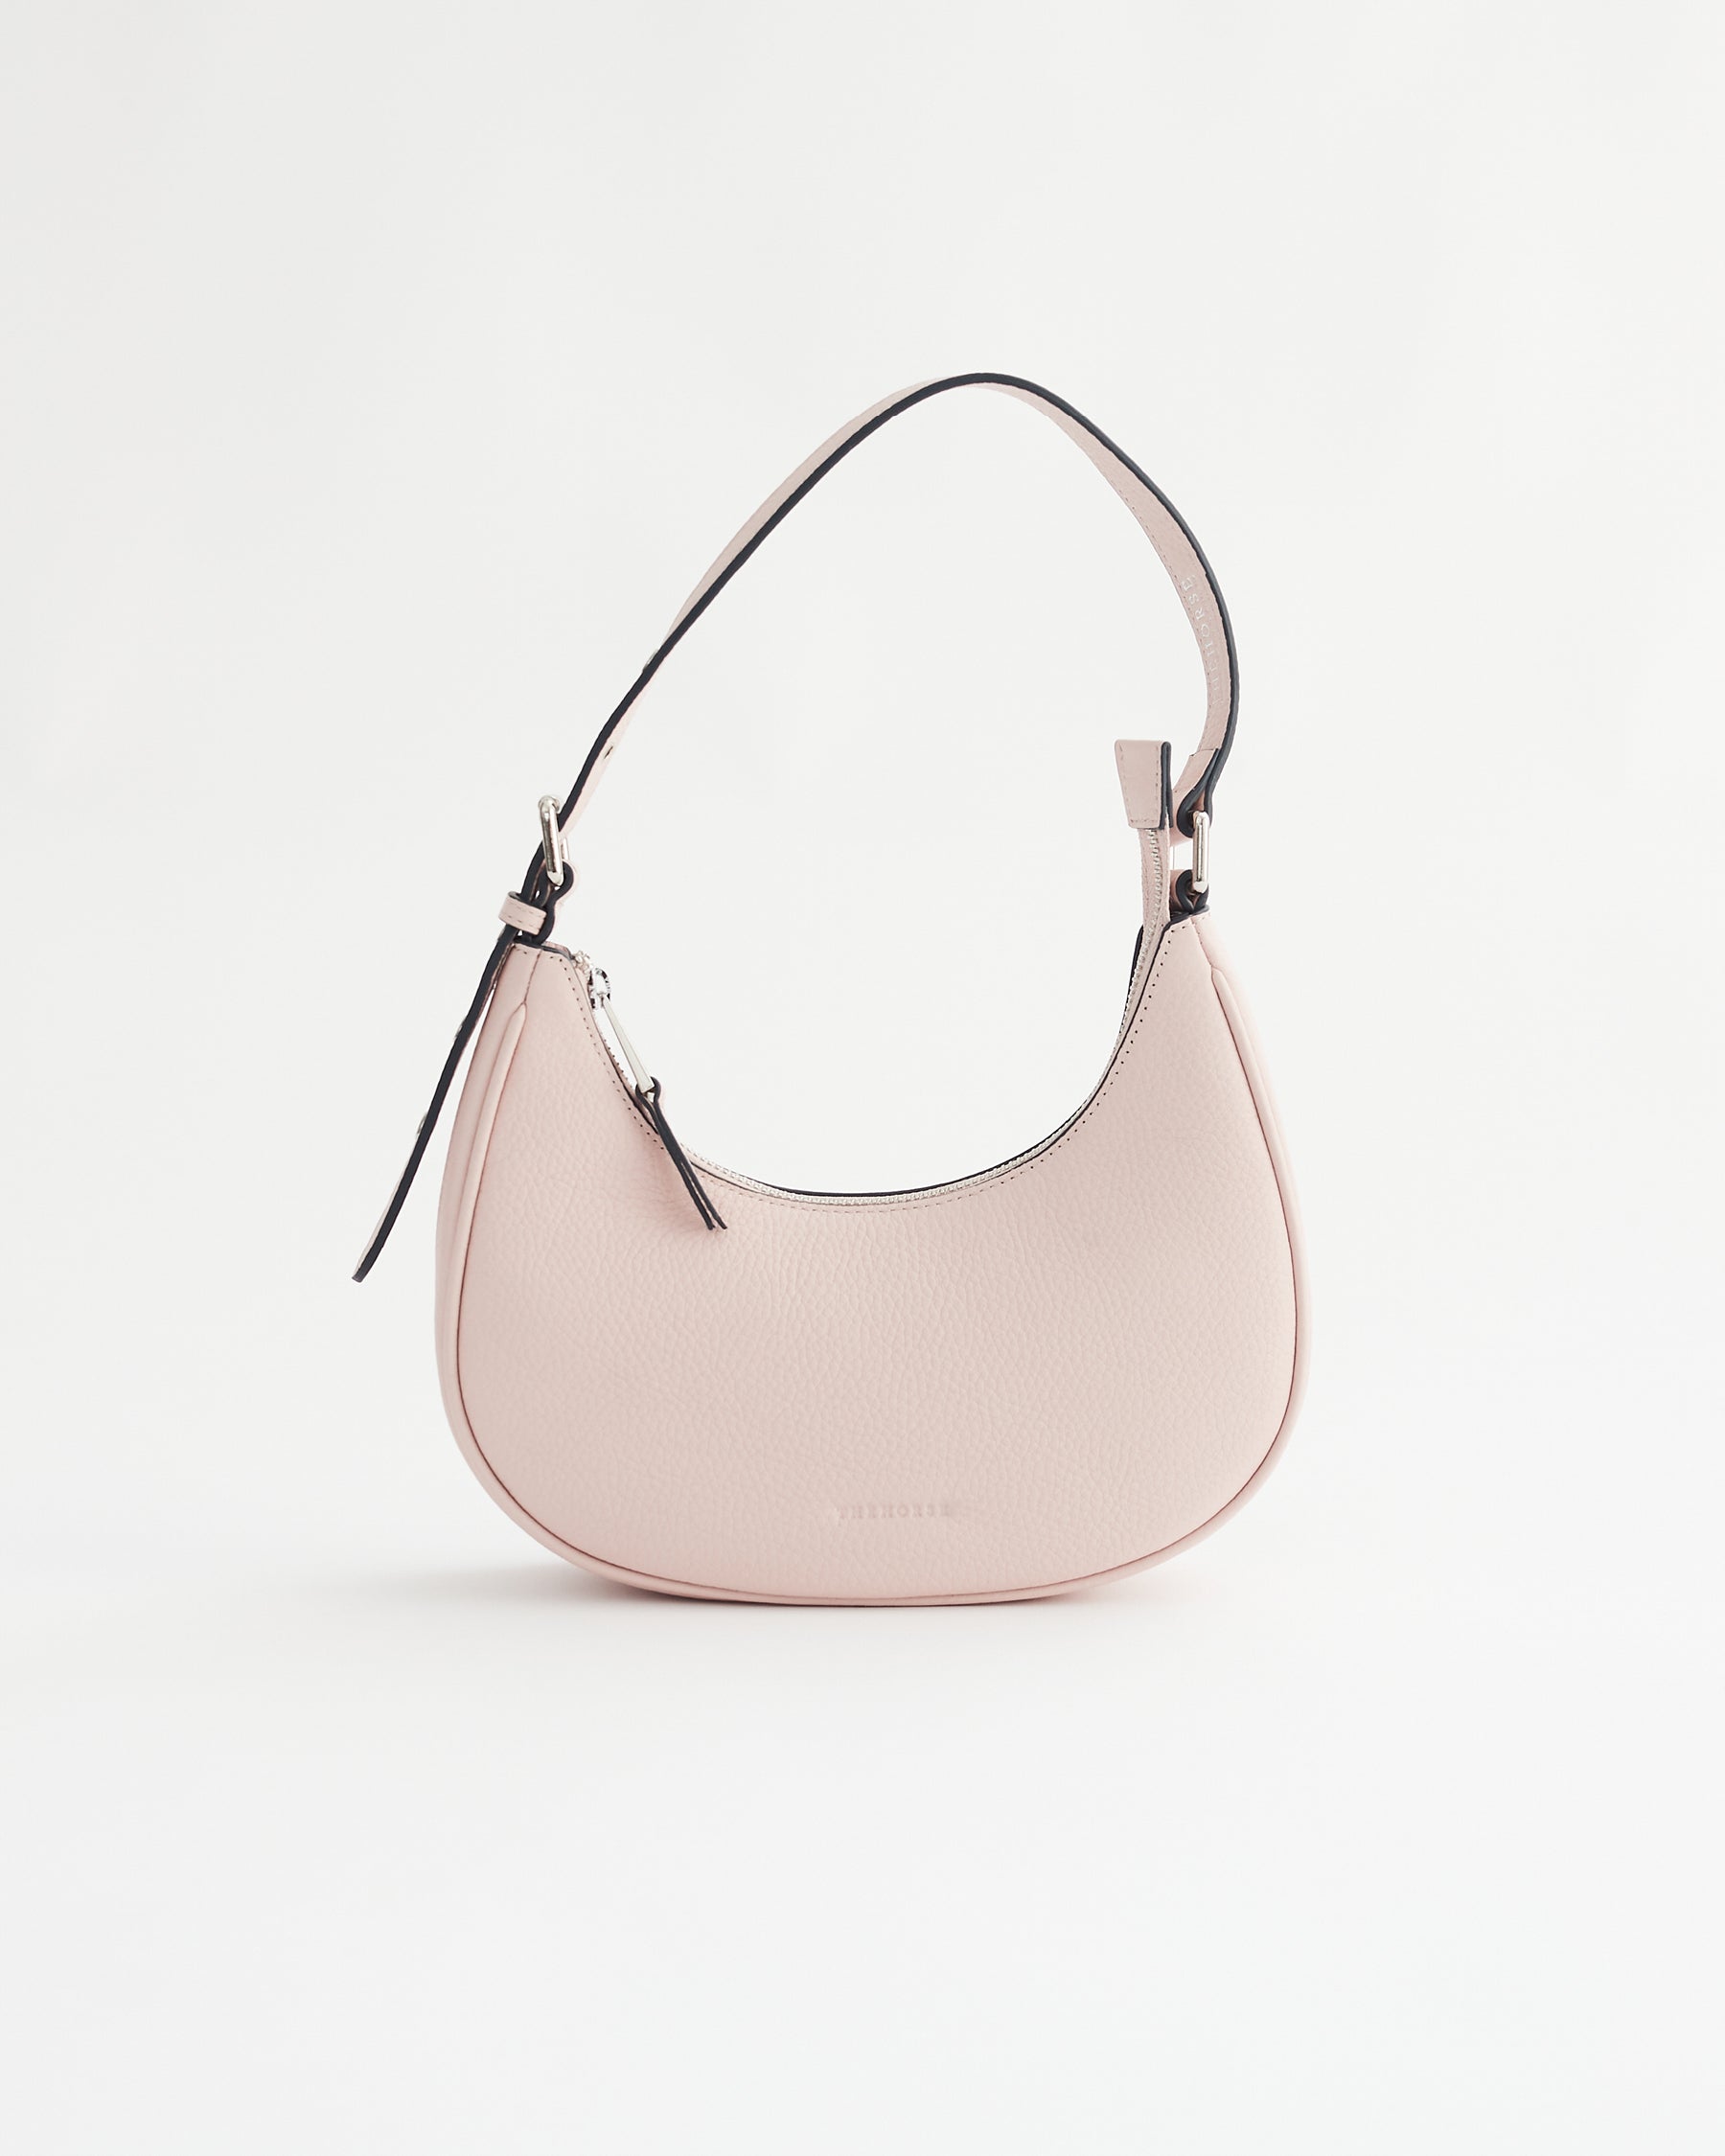 Friday Bag: Leather Crescent Bag in Pink by The Horse®